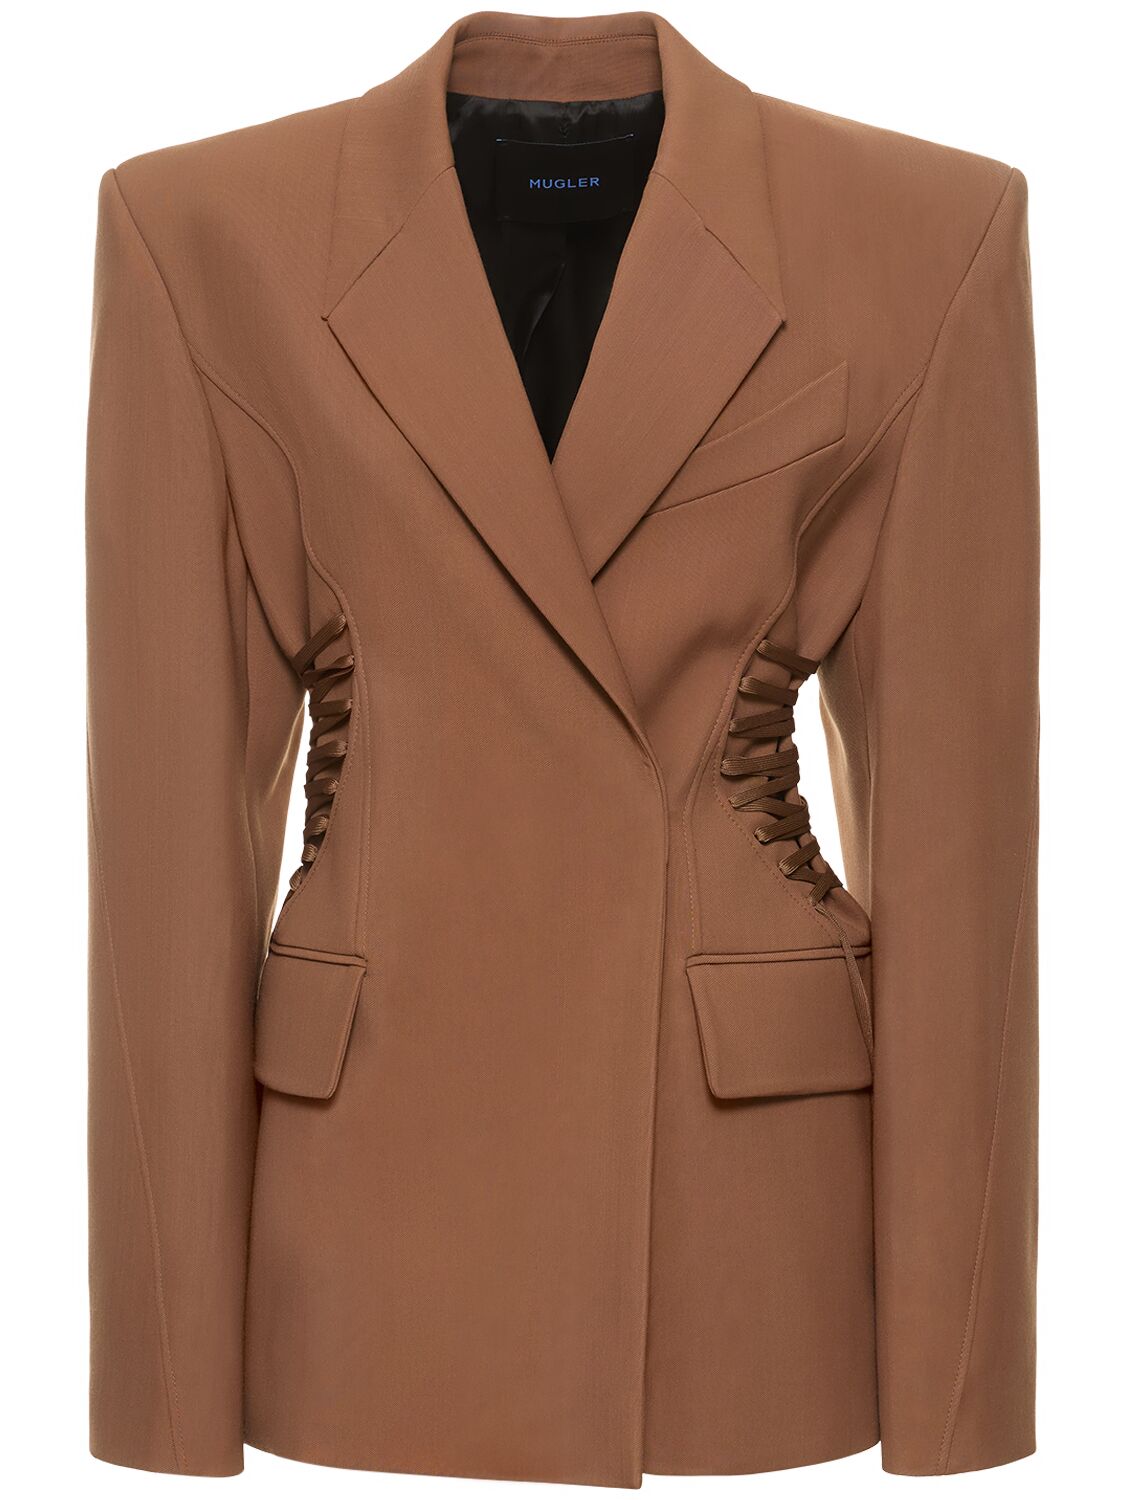 Mugler Fitted Waist Oversized Jacket W/ Laces In Camel